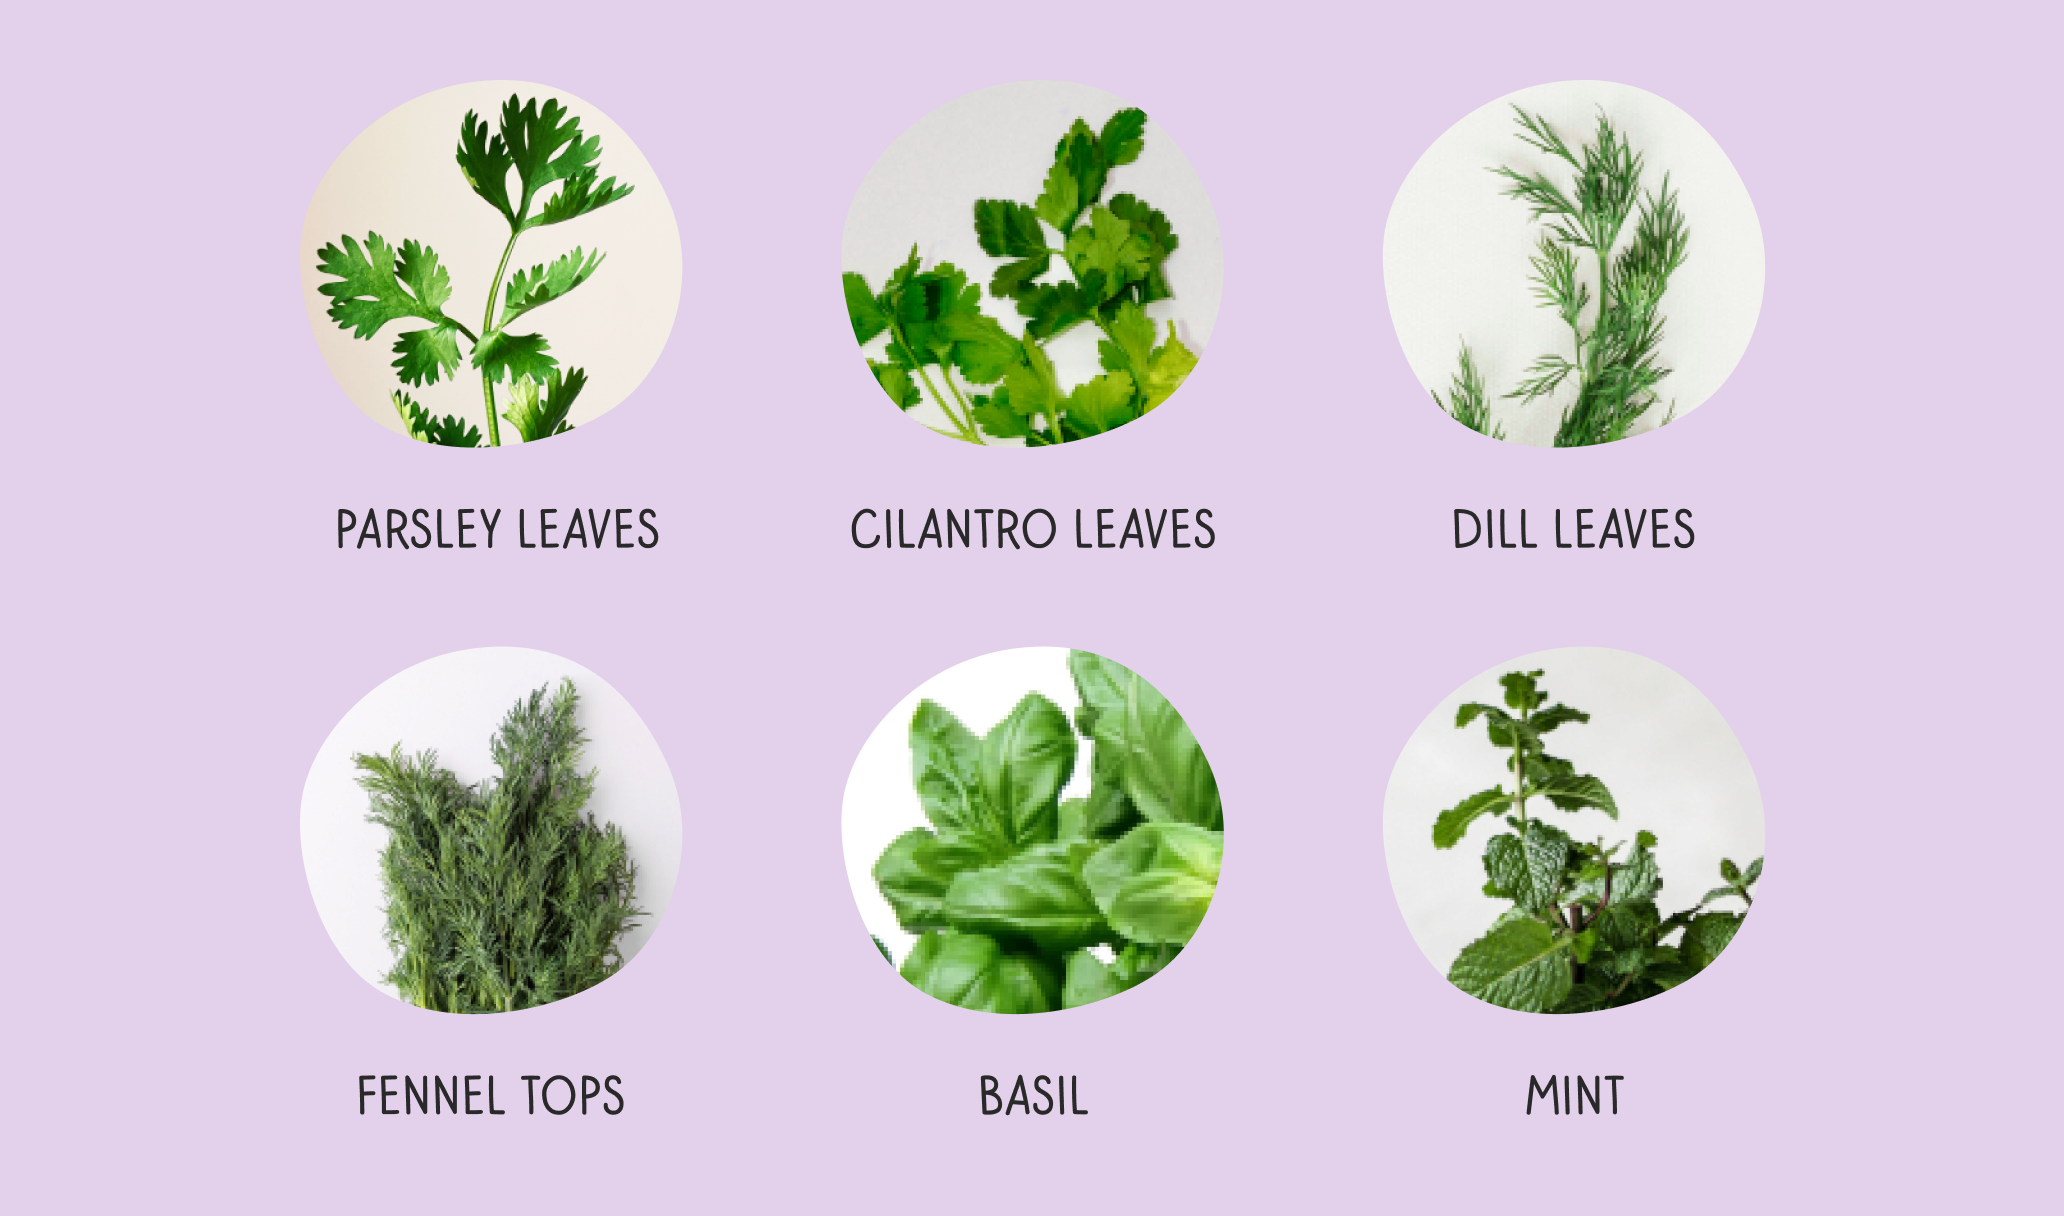 Mint 101: Benefits, Nutrition, Storage, and More!